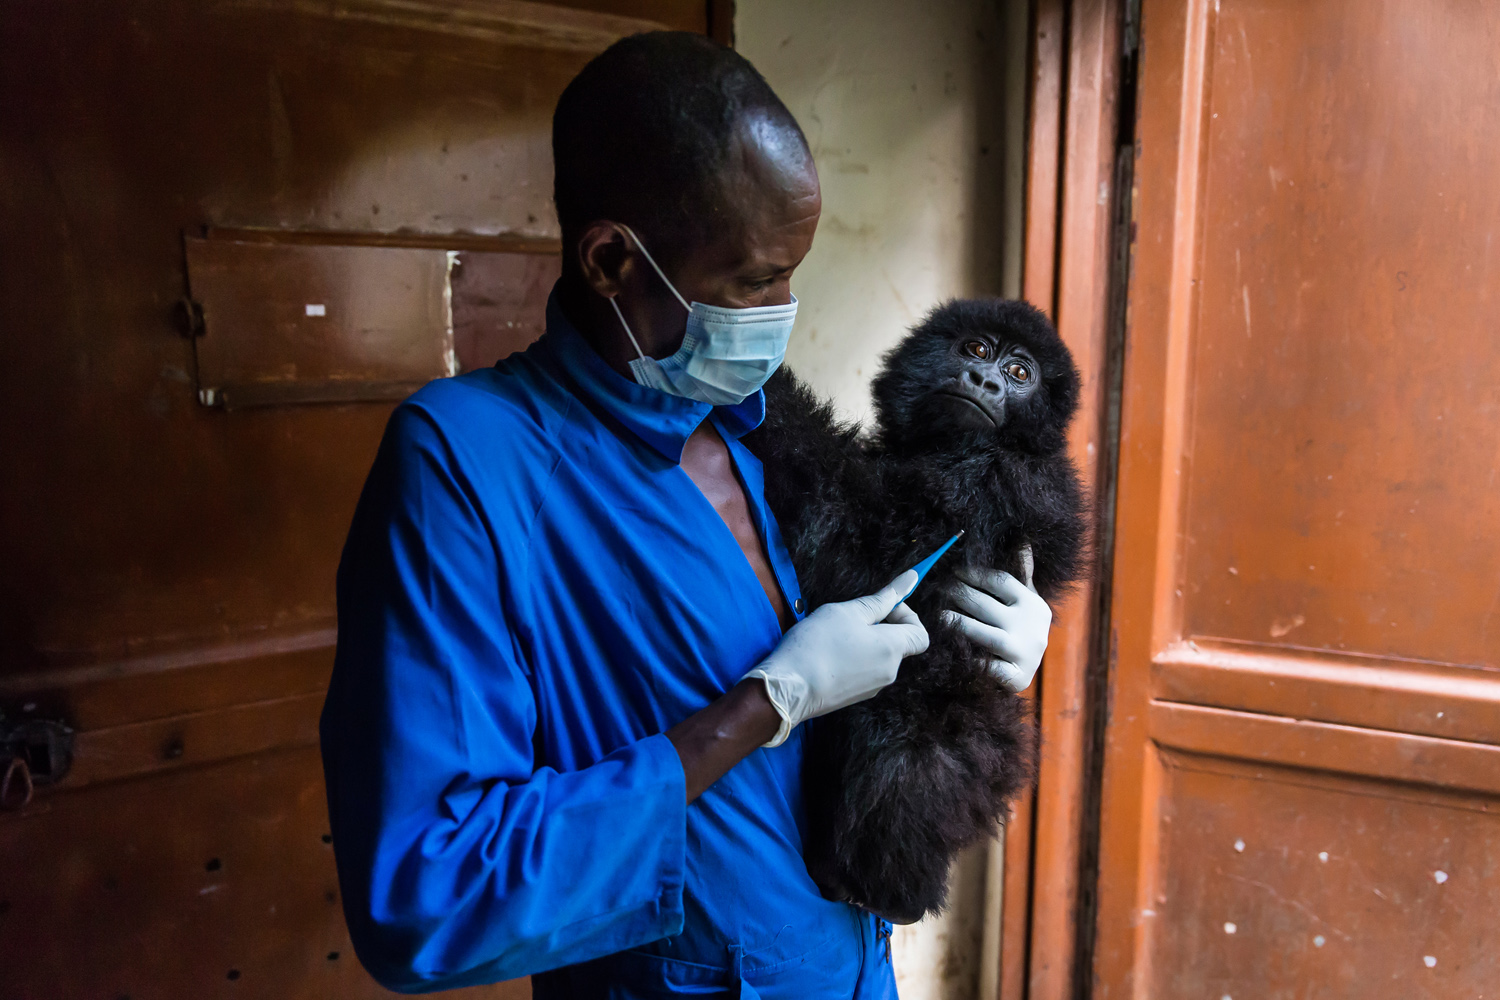 RUMANGABO, VIRUNGA, DEMOCRATIC REPUBLIC OF CONGO, 7 AUGUST 20013: The beginning of the day at Senkekwe Mountain Gorilla Orphanage as caretakers take the temperature of a new orphan mountain gorilla at ICCN headquarters, Rumangabo, DRC, 7 August 2013. It is suspected that this orphan was taken by soldiers who probably killed the mother to get the baby. When they were unable to sell it, the orphan was abandoned and the conservation rangers heard and rescued it. Wounds from a rope were evident on its chest and back, it is slowly recovering now as it lives full time with caretakers who also sleep in the enclosure with the orphan. There are a number of other orphans at the center who will be introduced to the new baby once it has been through quarantine and is accustomed to its new surroundings. (Photo by Brent Stirton/Reportage for Getty Images.)